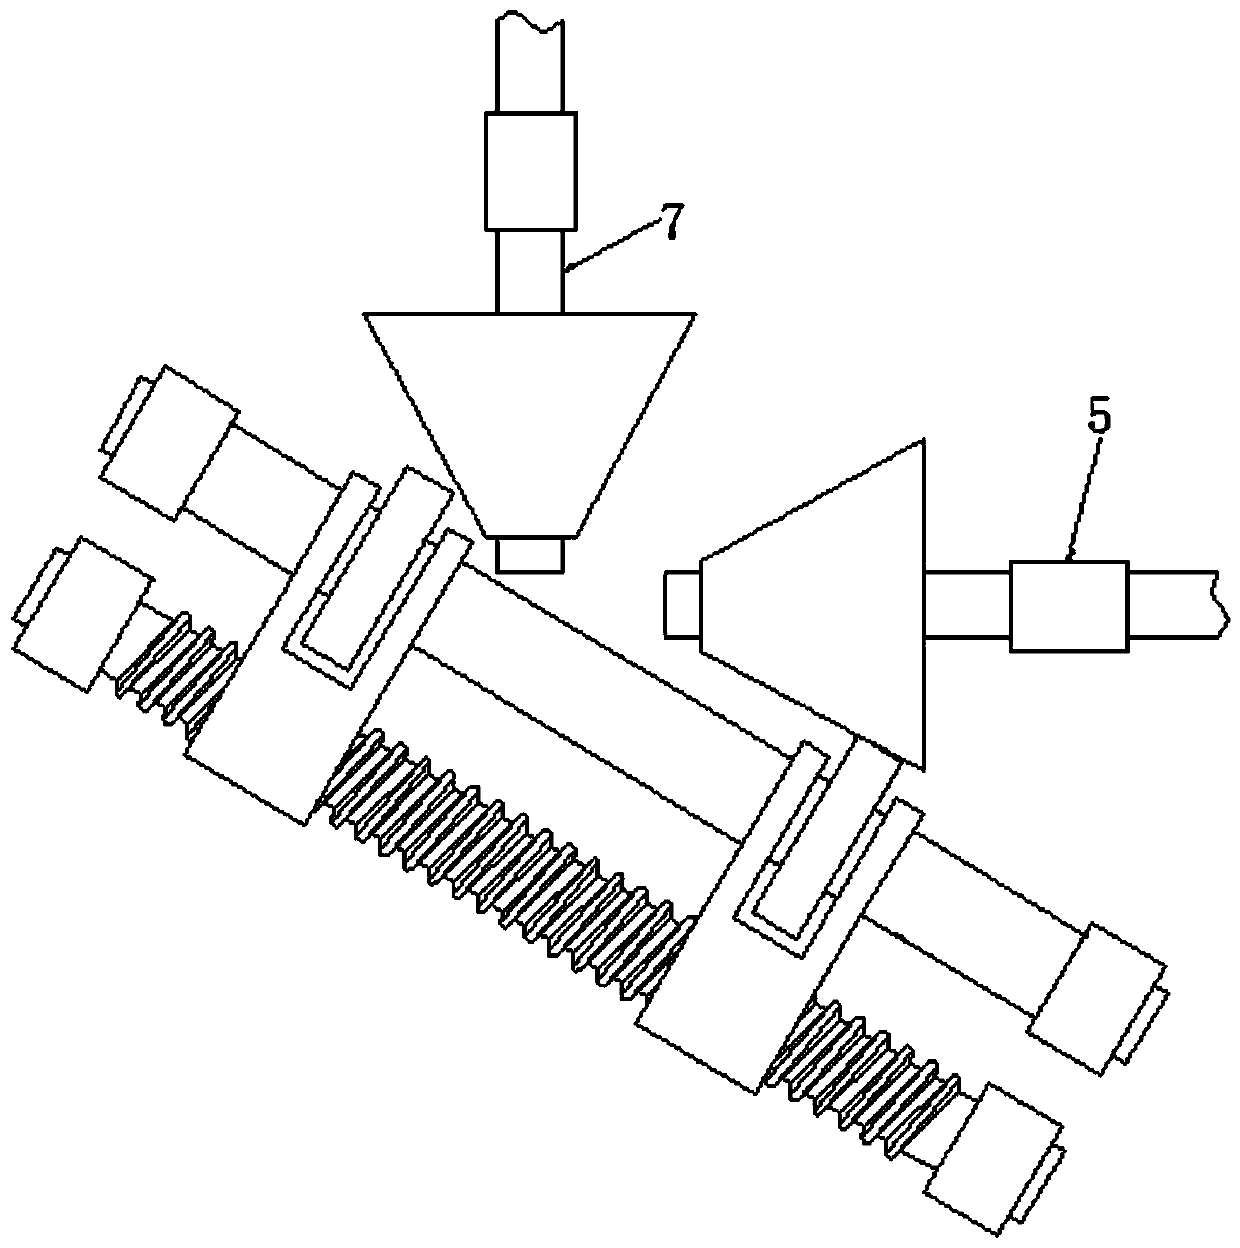 Oil expeller capable of changing expelling speed and preventing blockage based on gravity variation